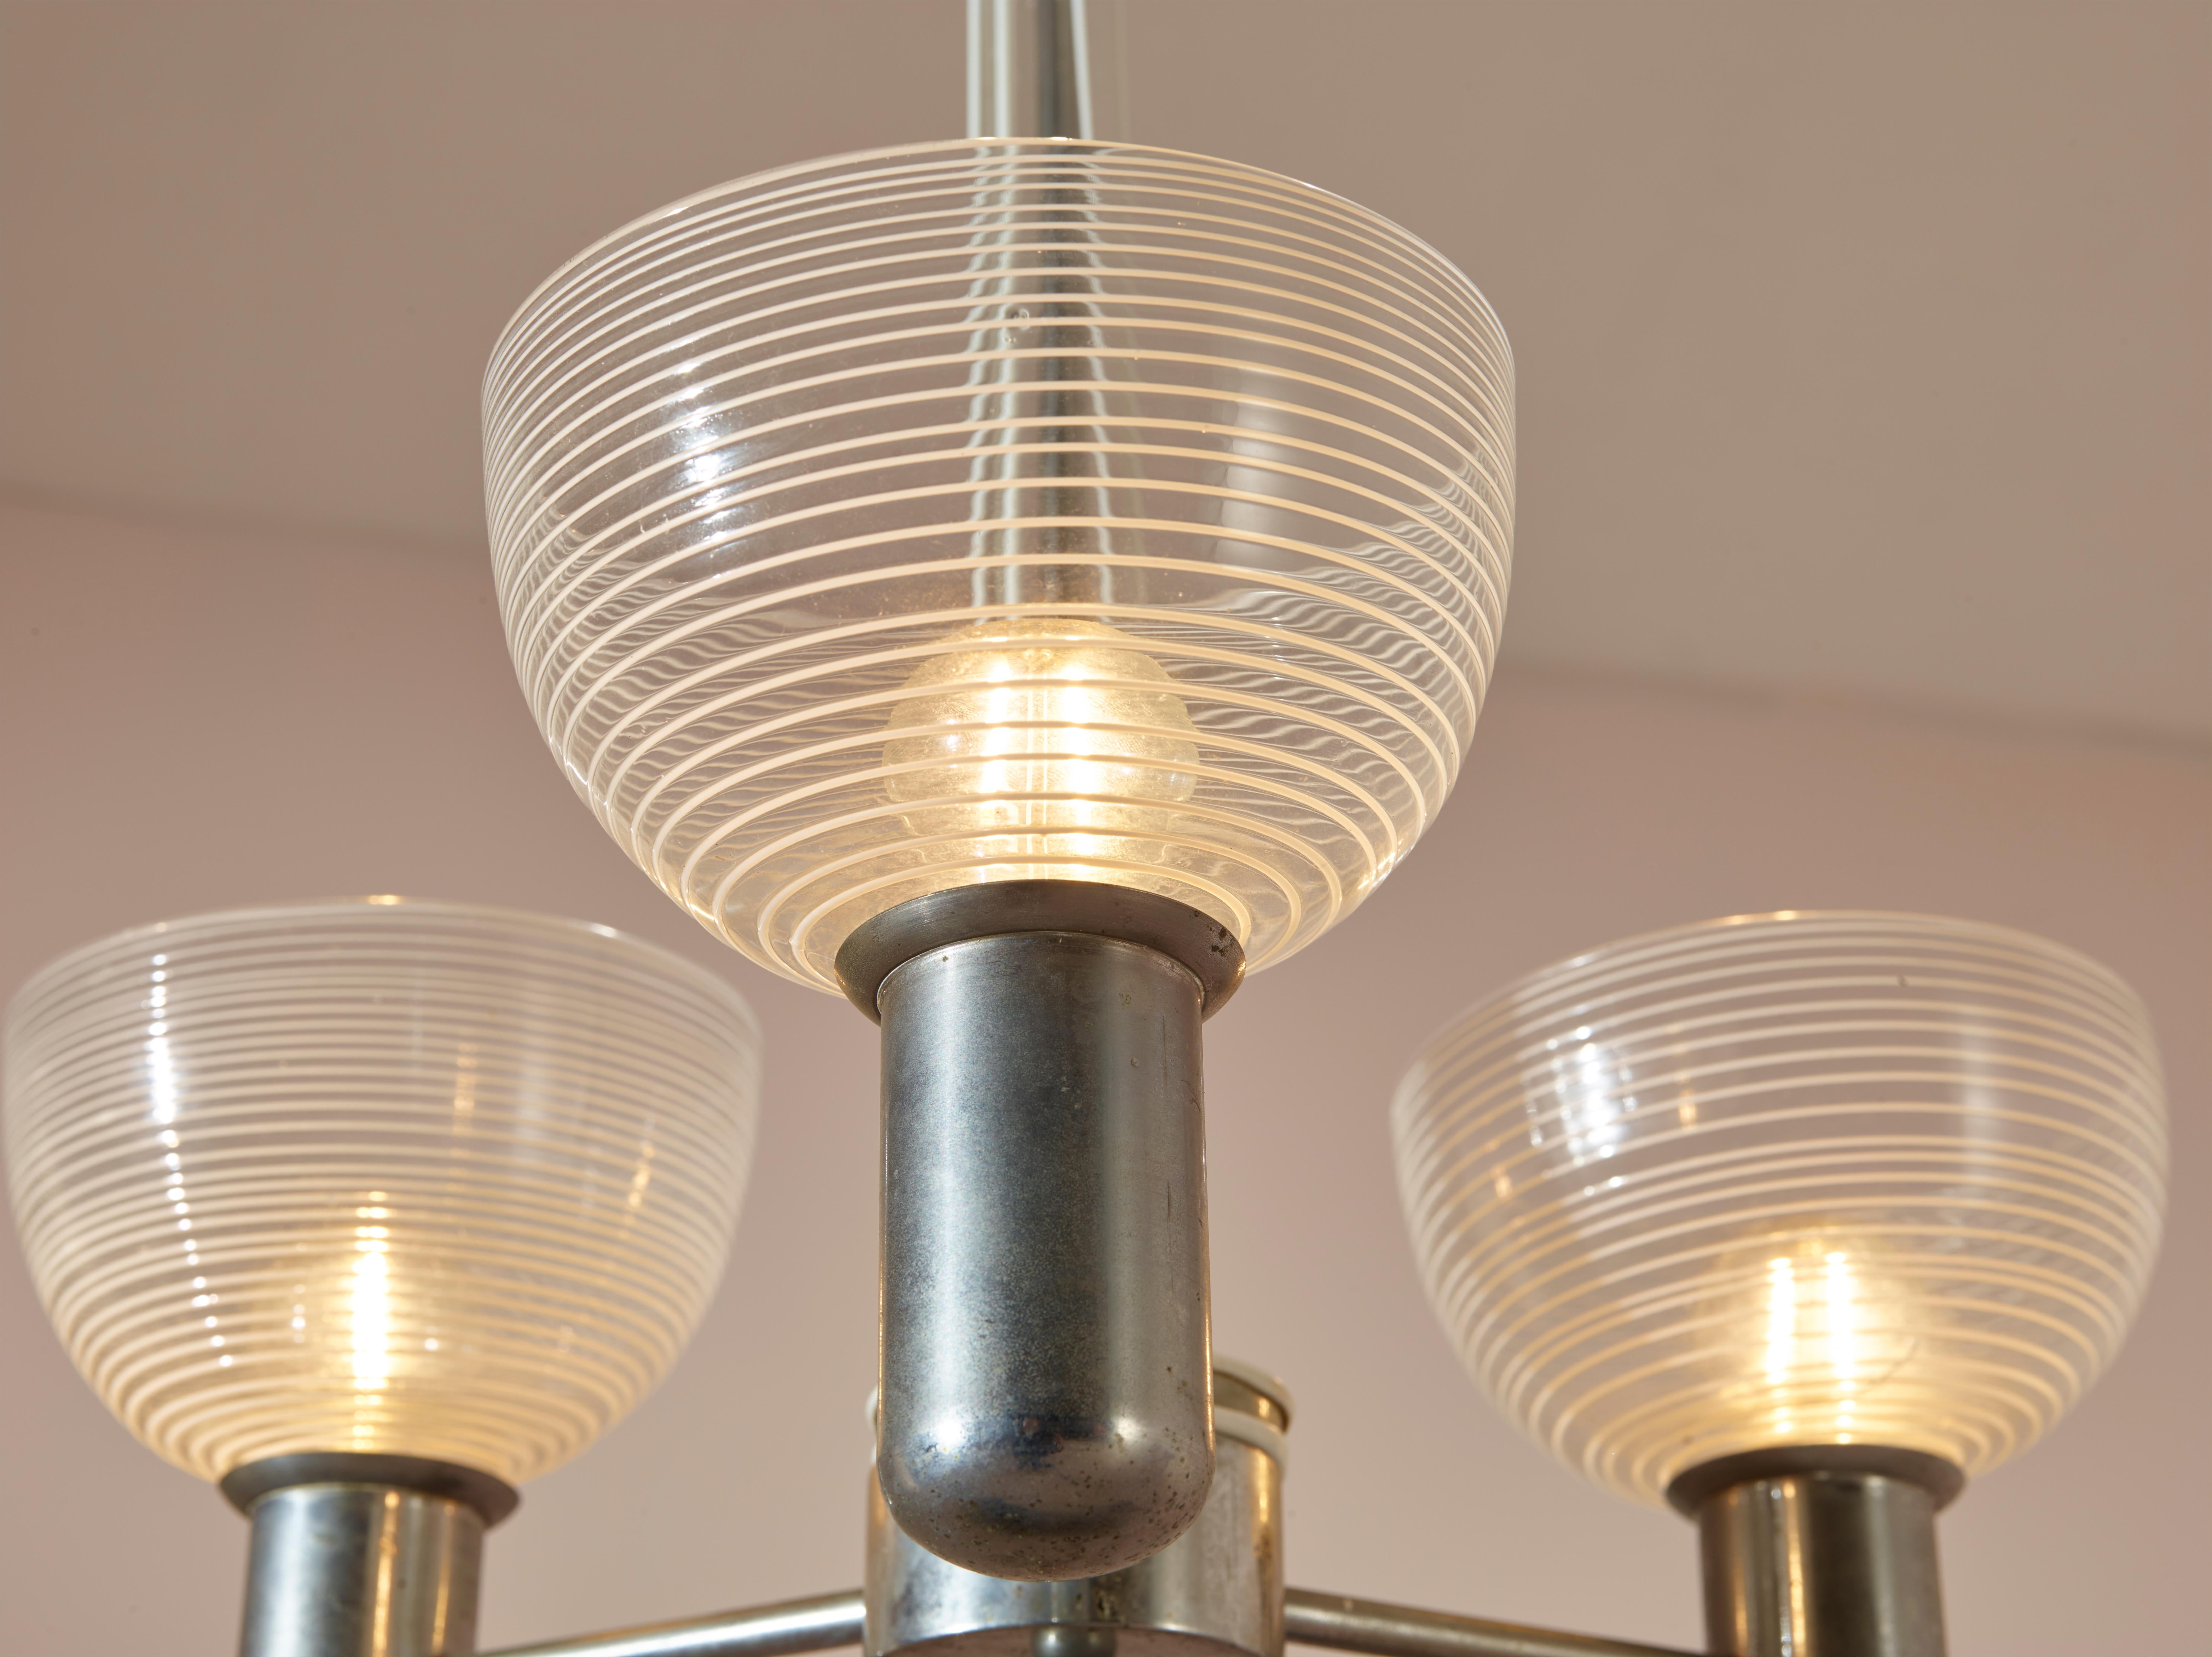 Murano Rationalist Chandelier with Filigrana and Lattimo Glass, Italy, 1930s For Sale 5